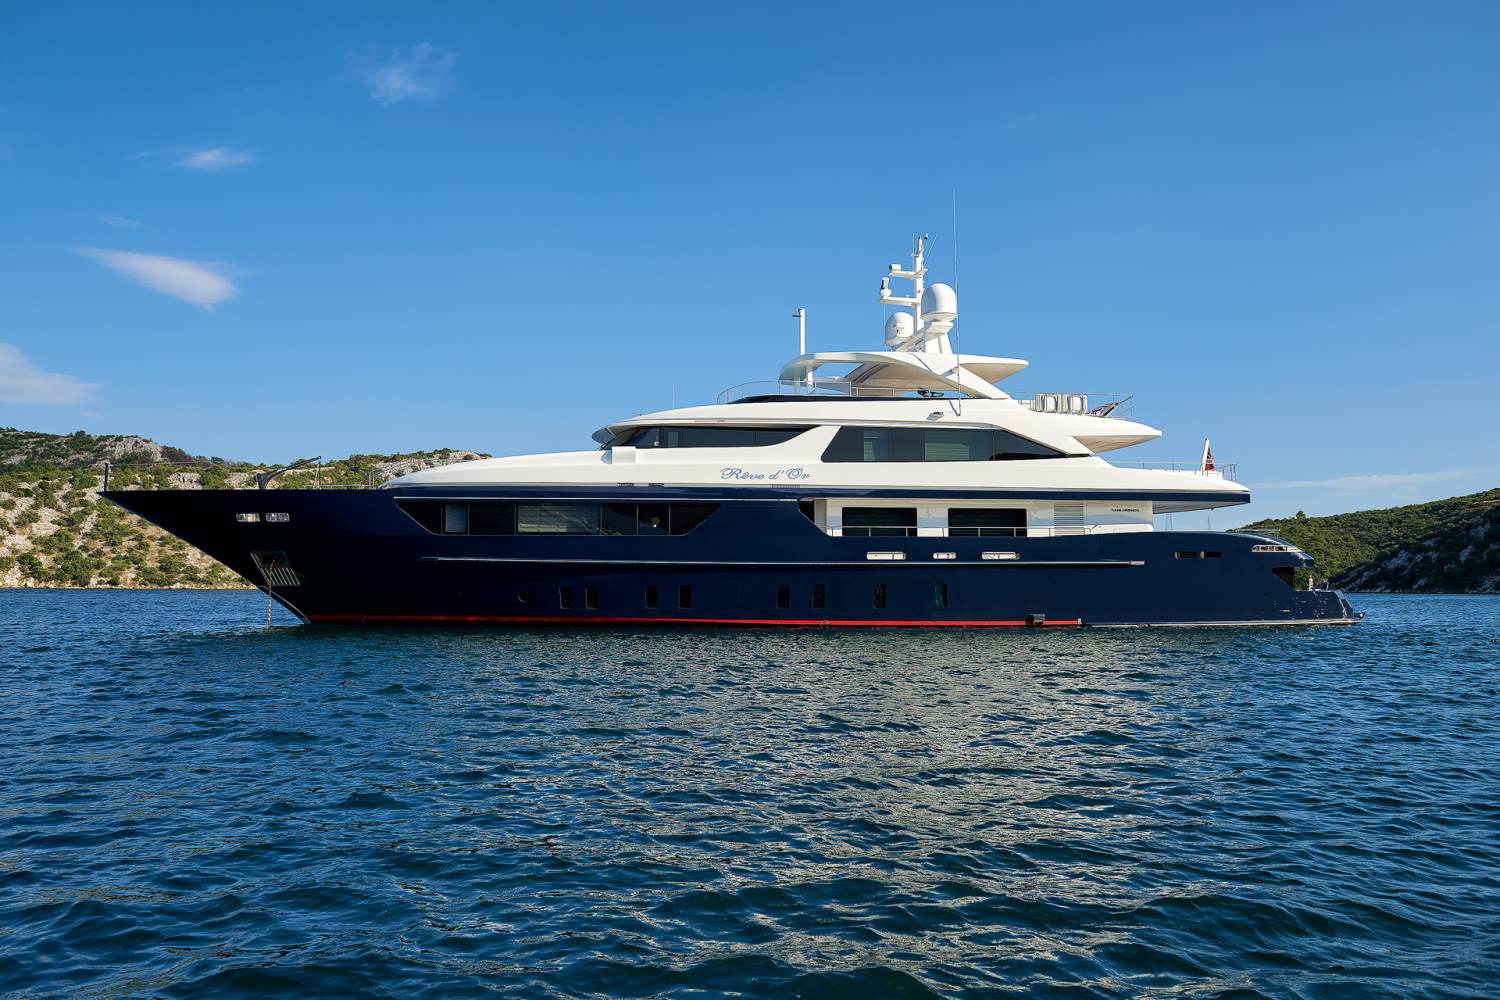 Yacht REVE D'OR By Sanlorenzo - Profile